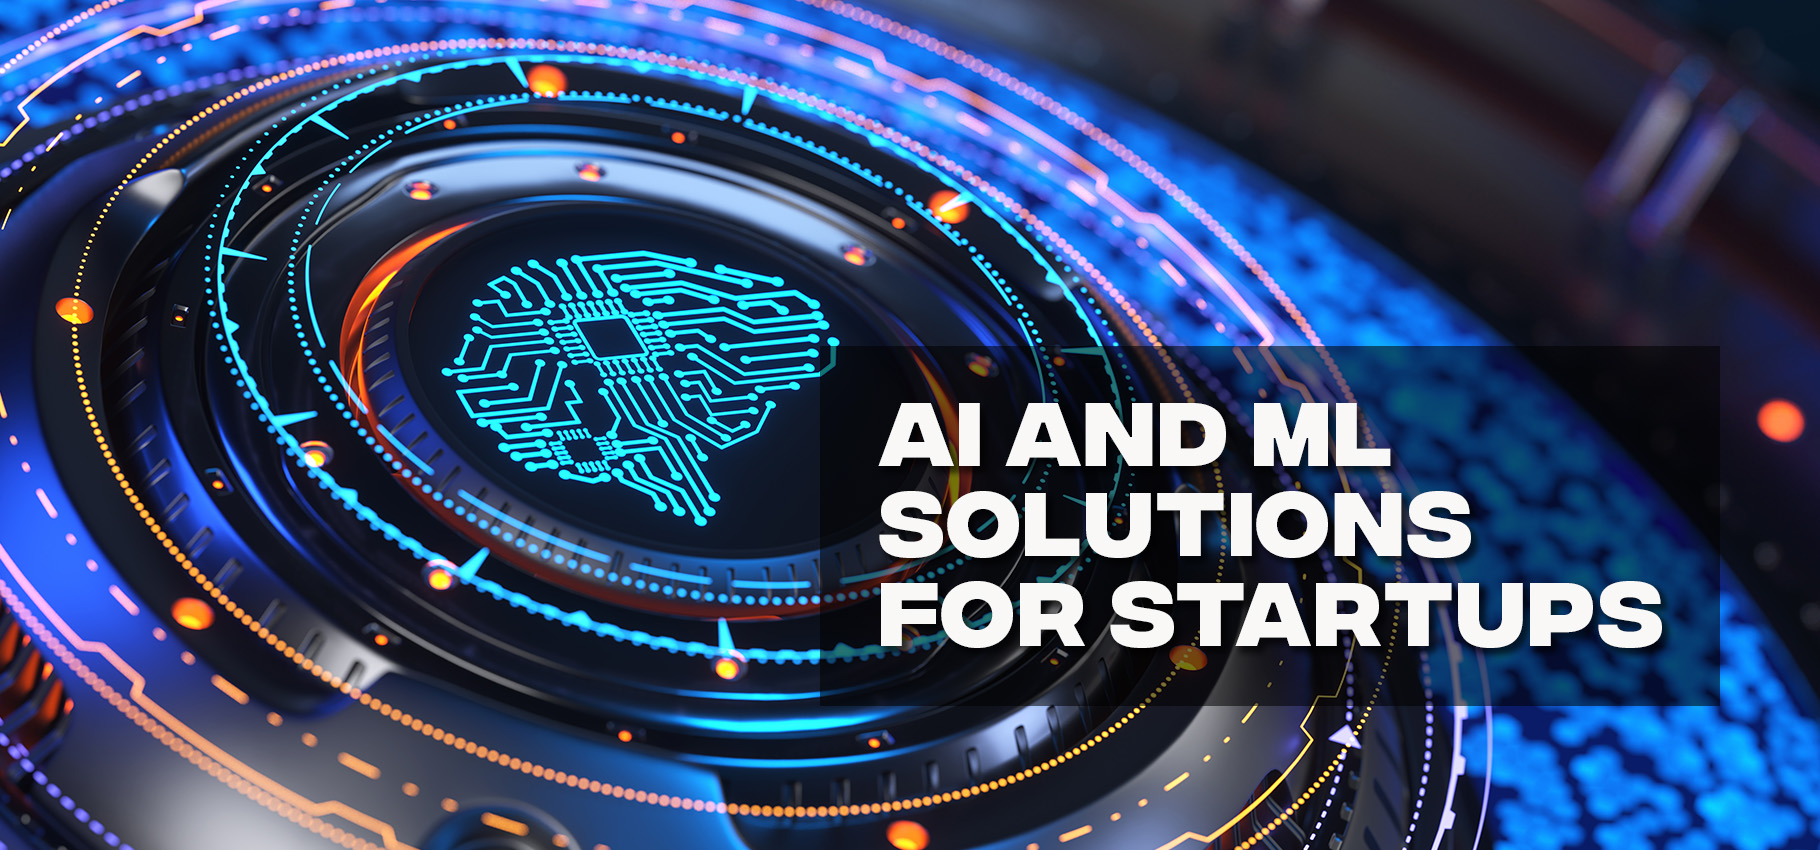 AI and ML Solutions for Startups